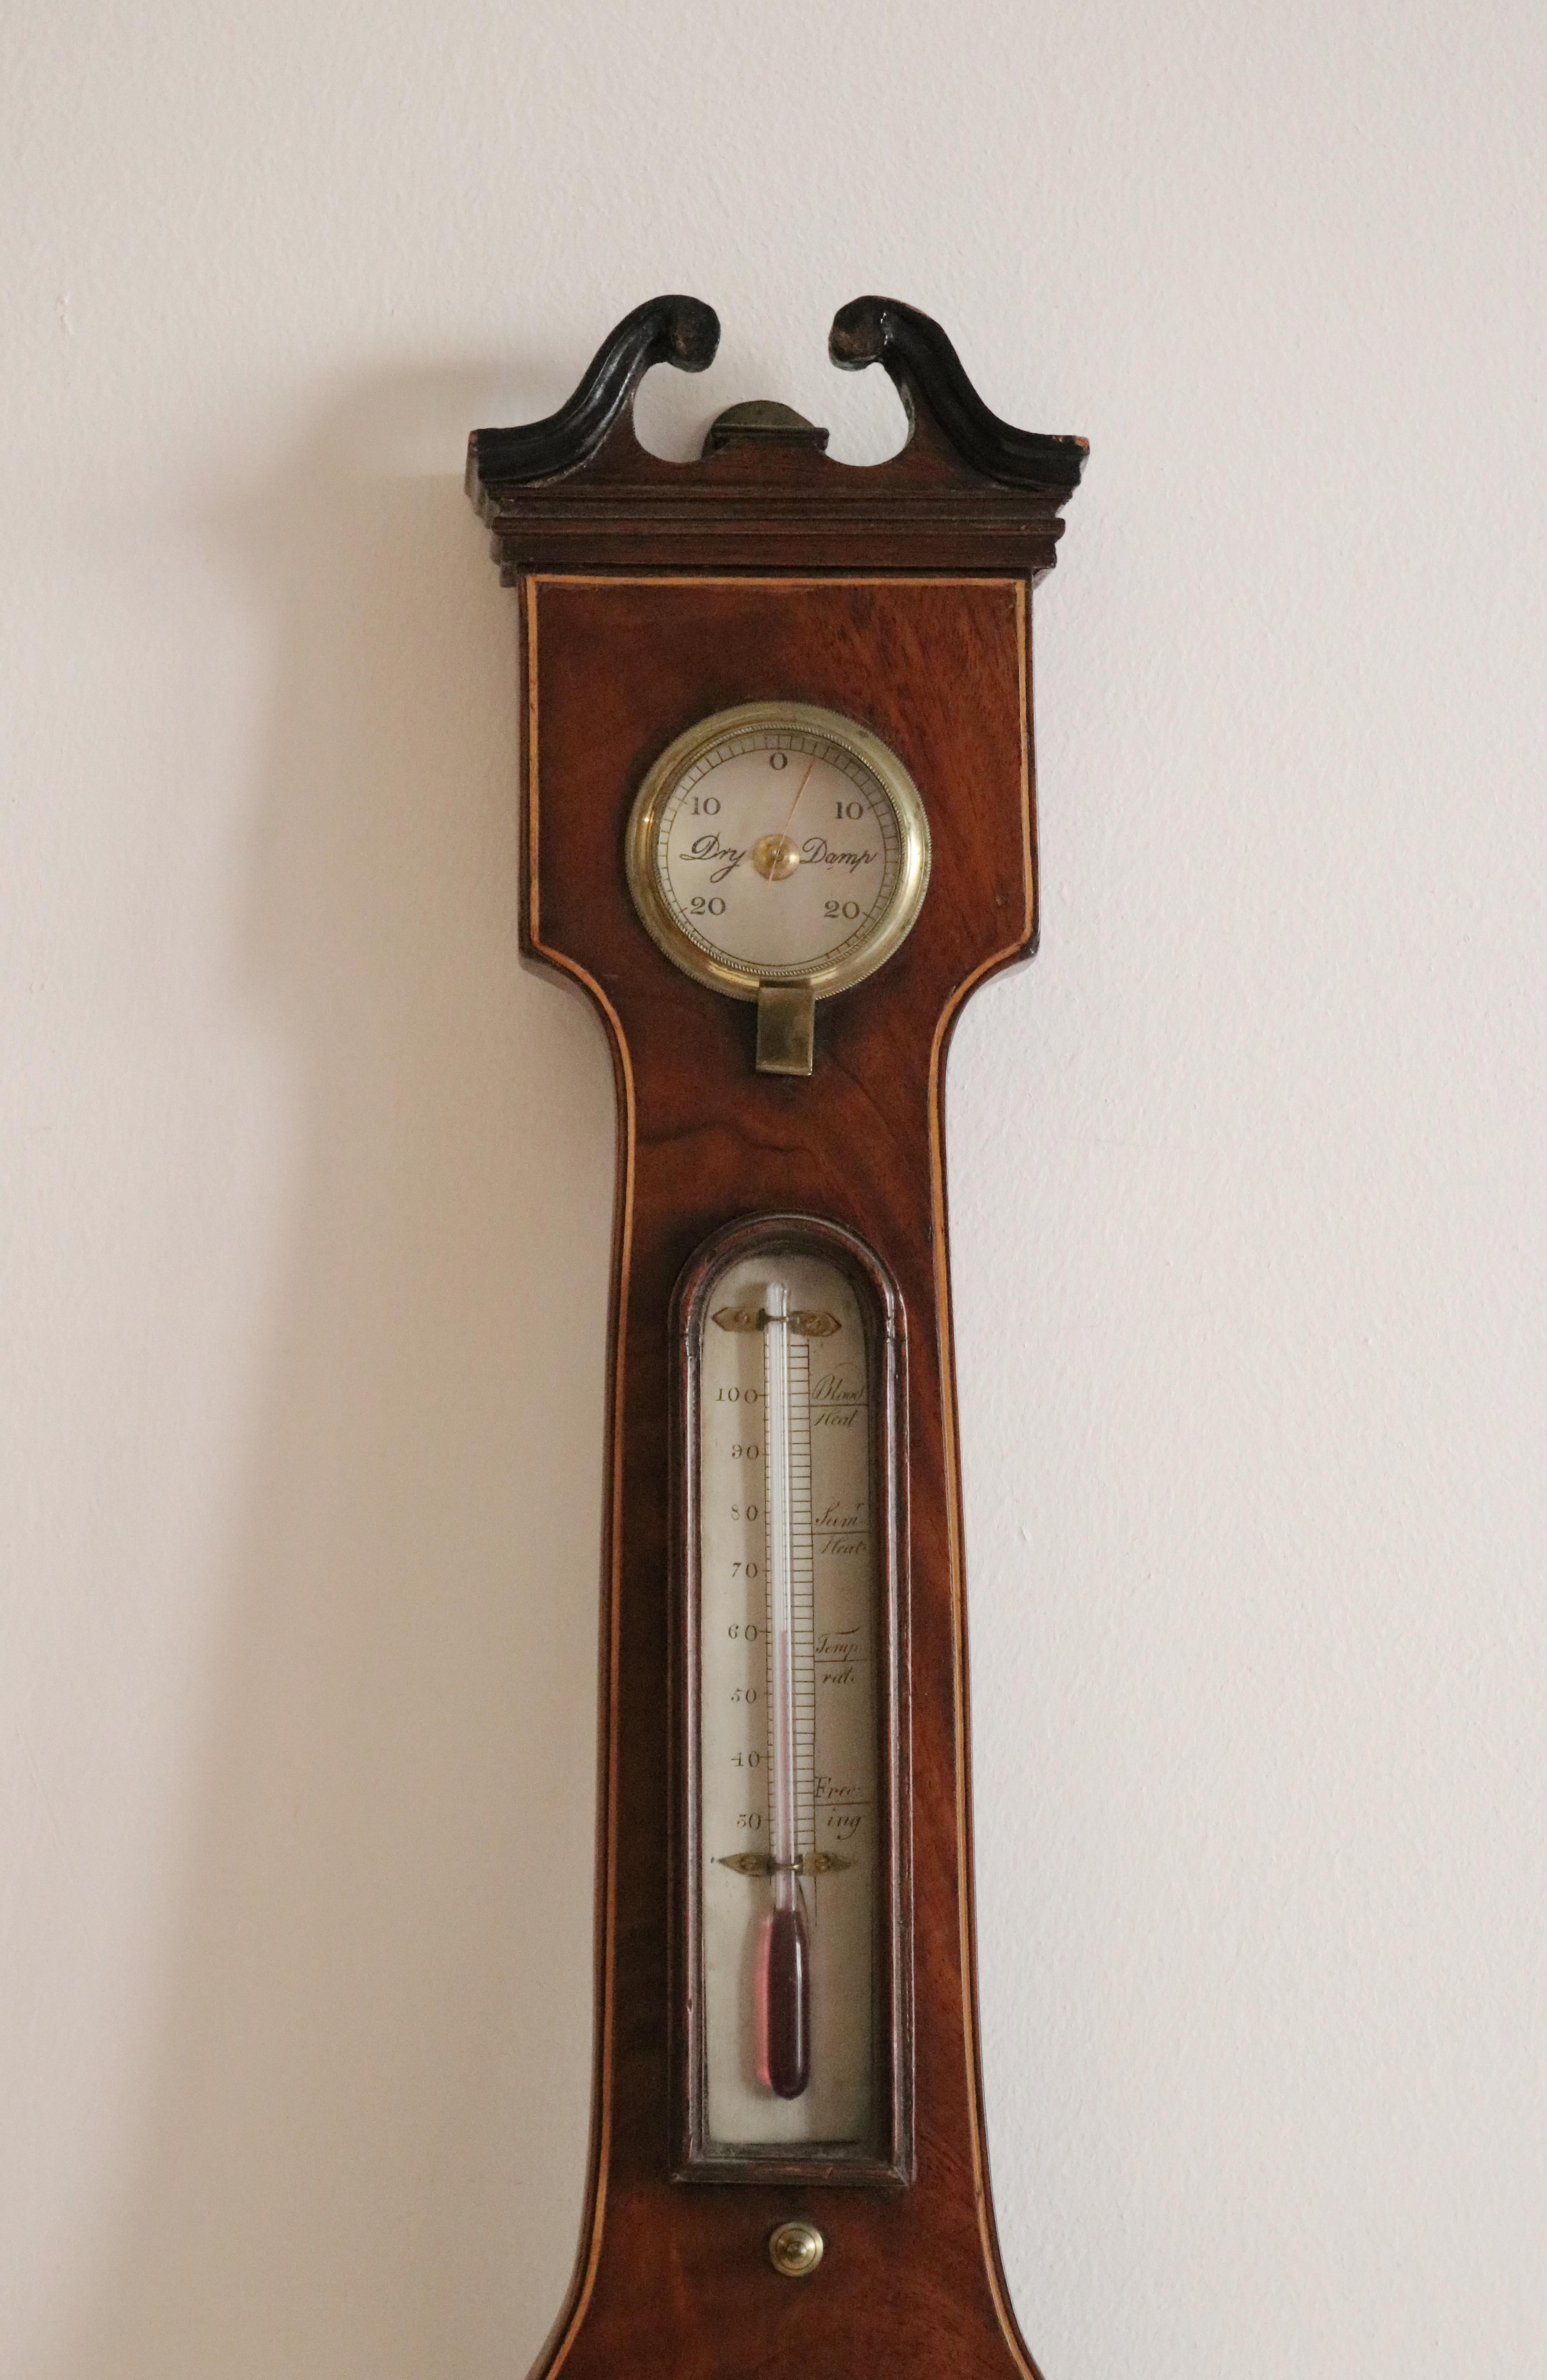 With margin of inlay against mahogany. Also with hygrometer, thermometer and convex mirror. The central dial silverised with very dry, set fair, fair, change, rain, much rain and stormy. With black numerals.

J.D. Torre